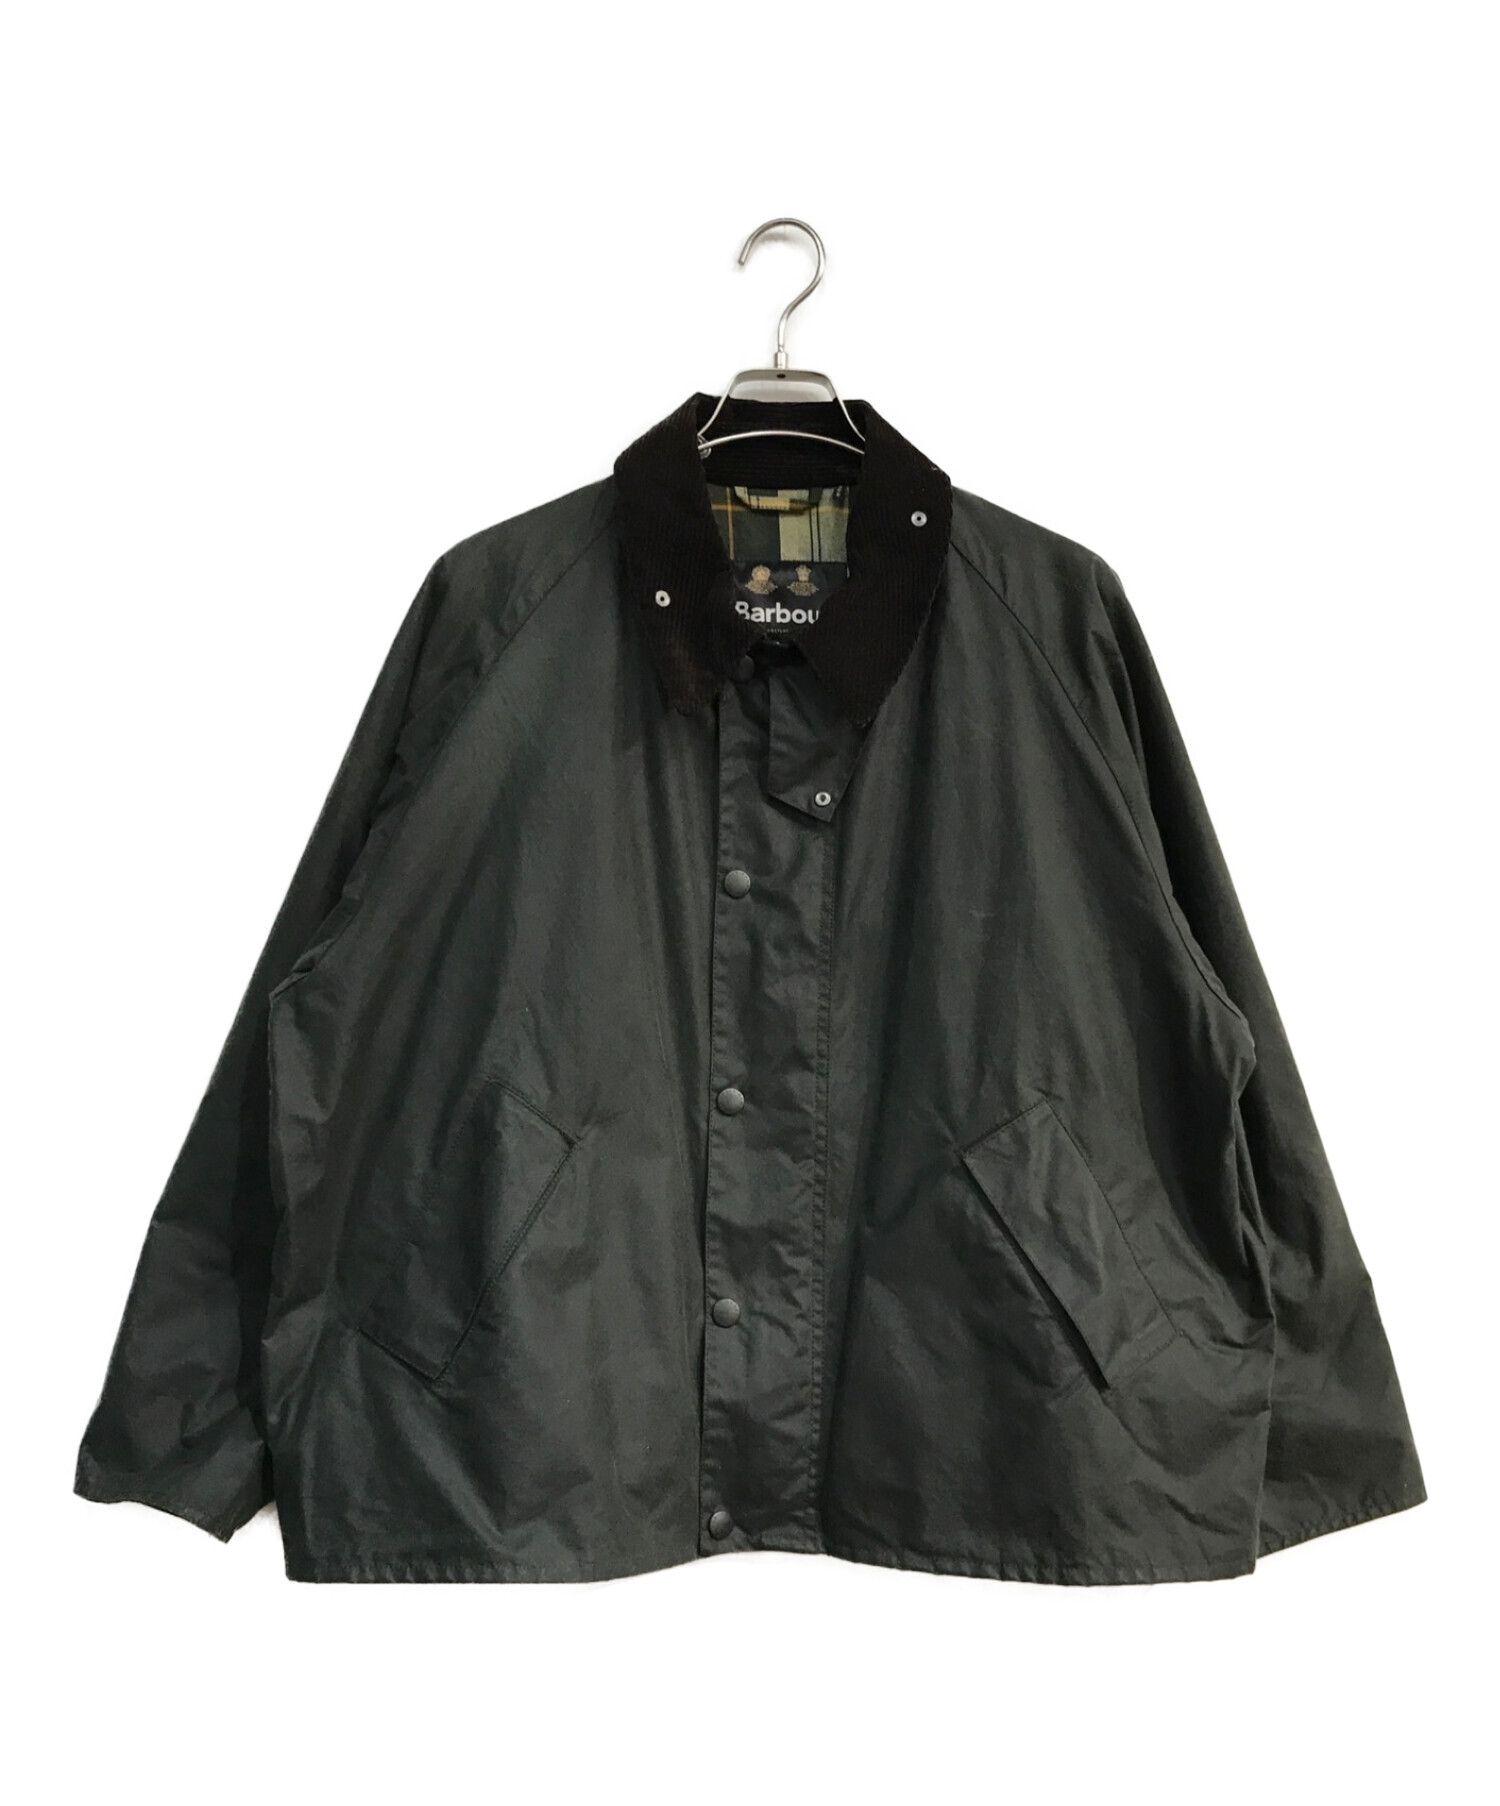 TRANSPORTBarbour TRANSPORT トランスポート カーキ 22AW ...